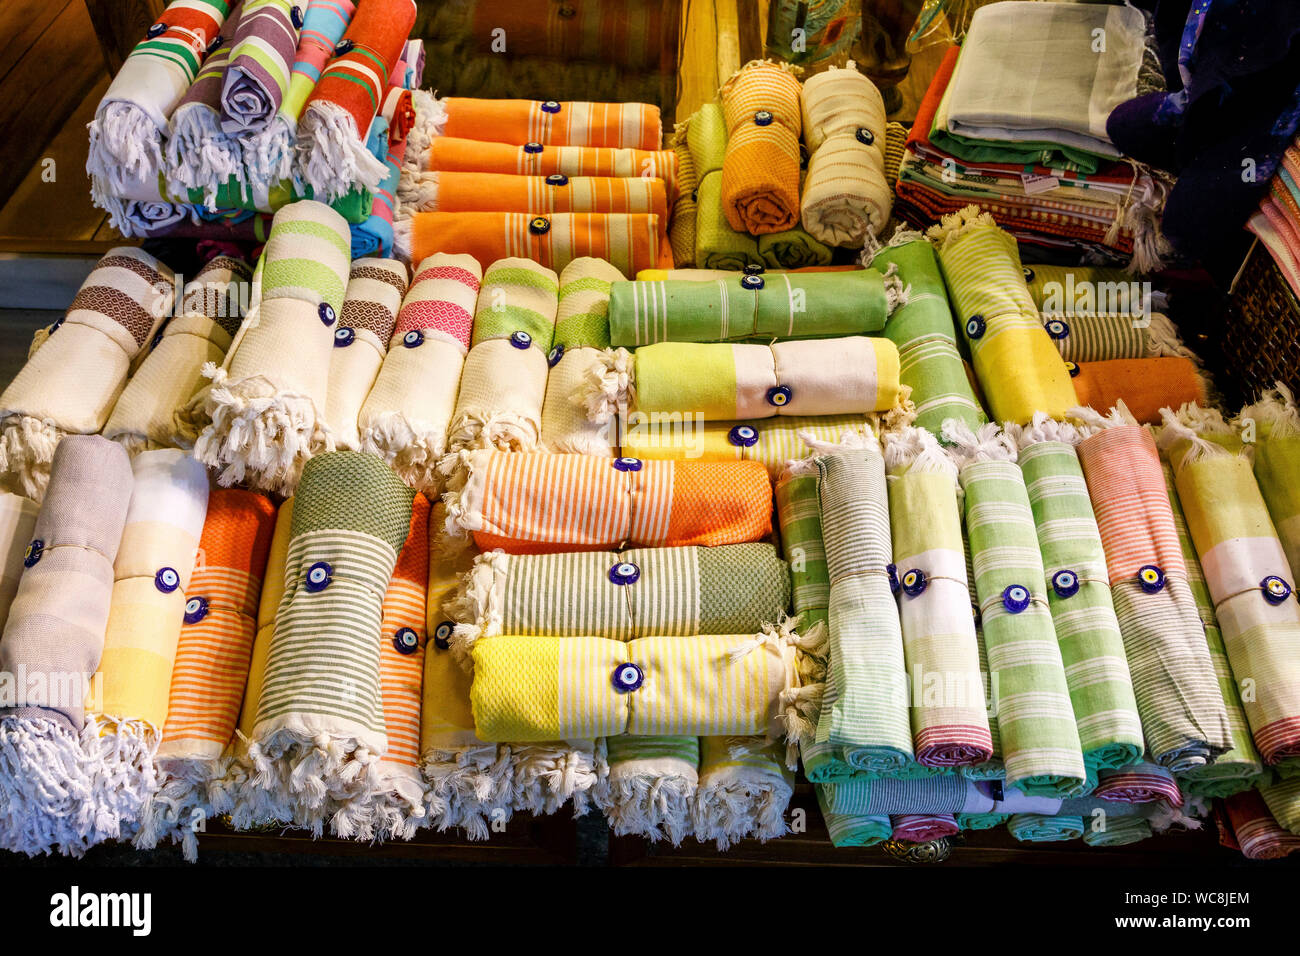 High Angle View Of Rolled Up Towels Tied With Evil Eye Beads At Market For  Sale Stock Photo - Alamy